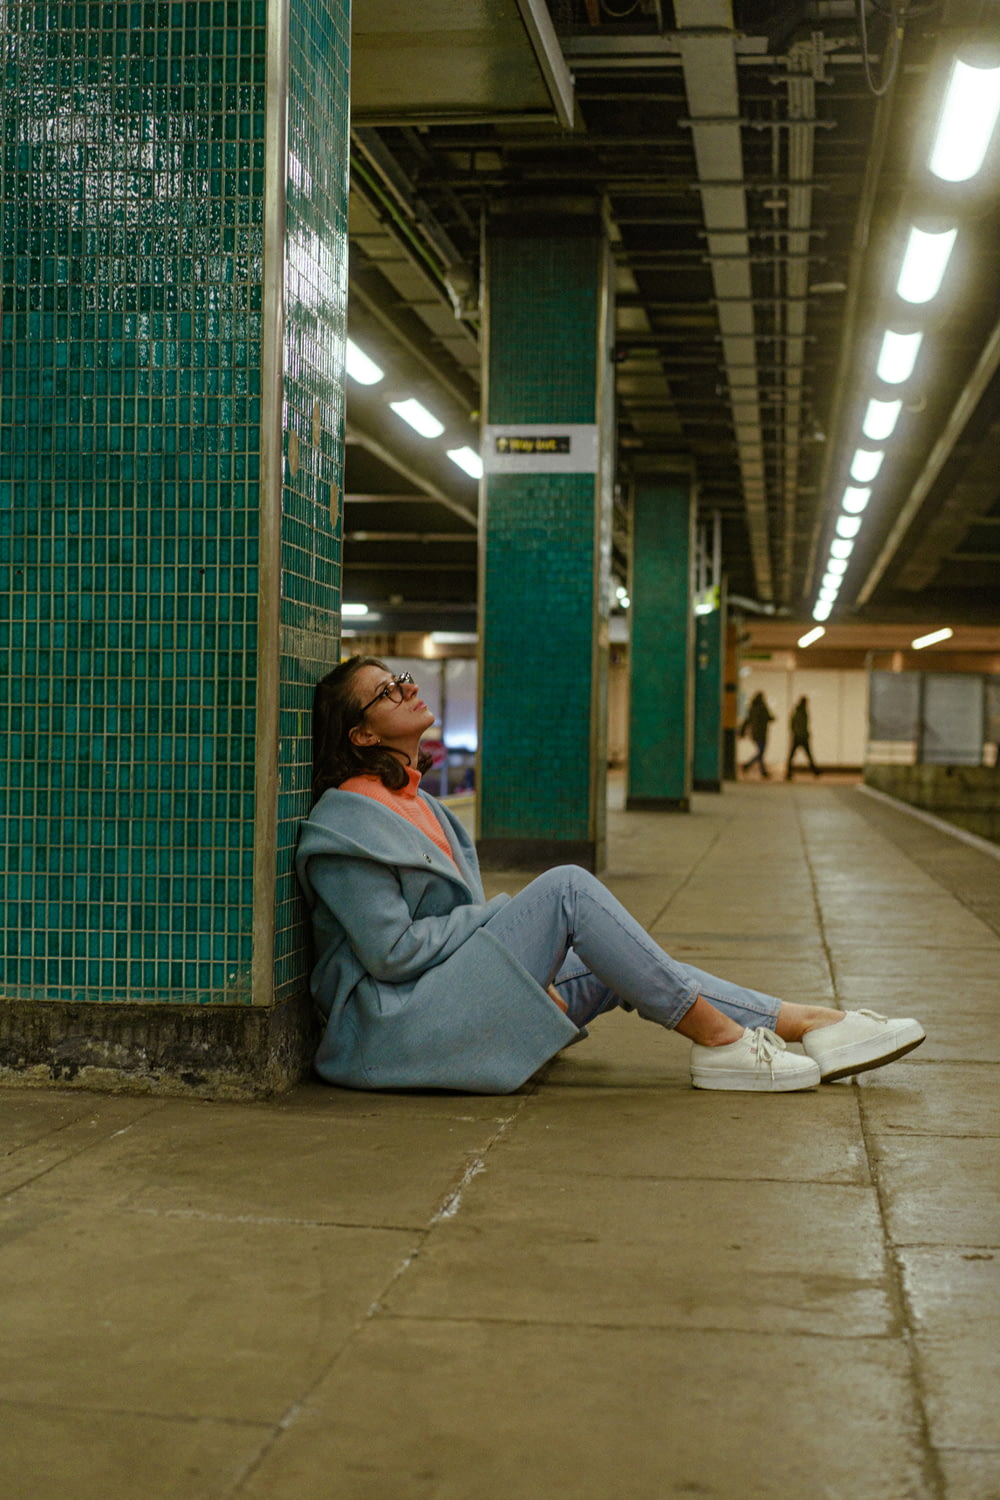 a woman sitting on the ground in a subway station